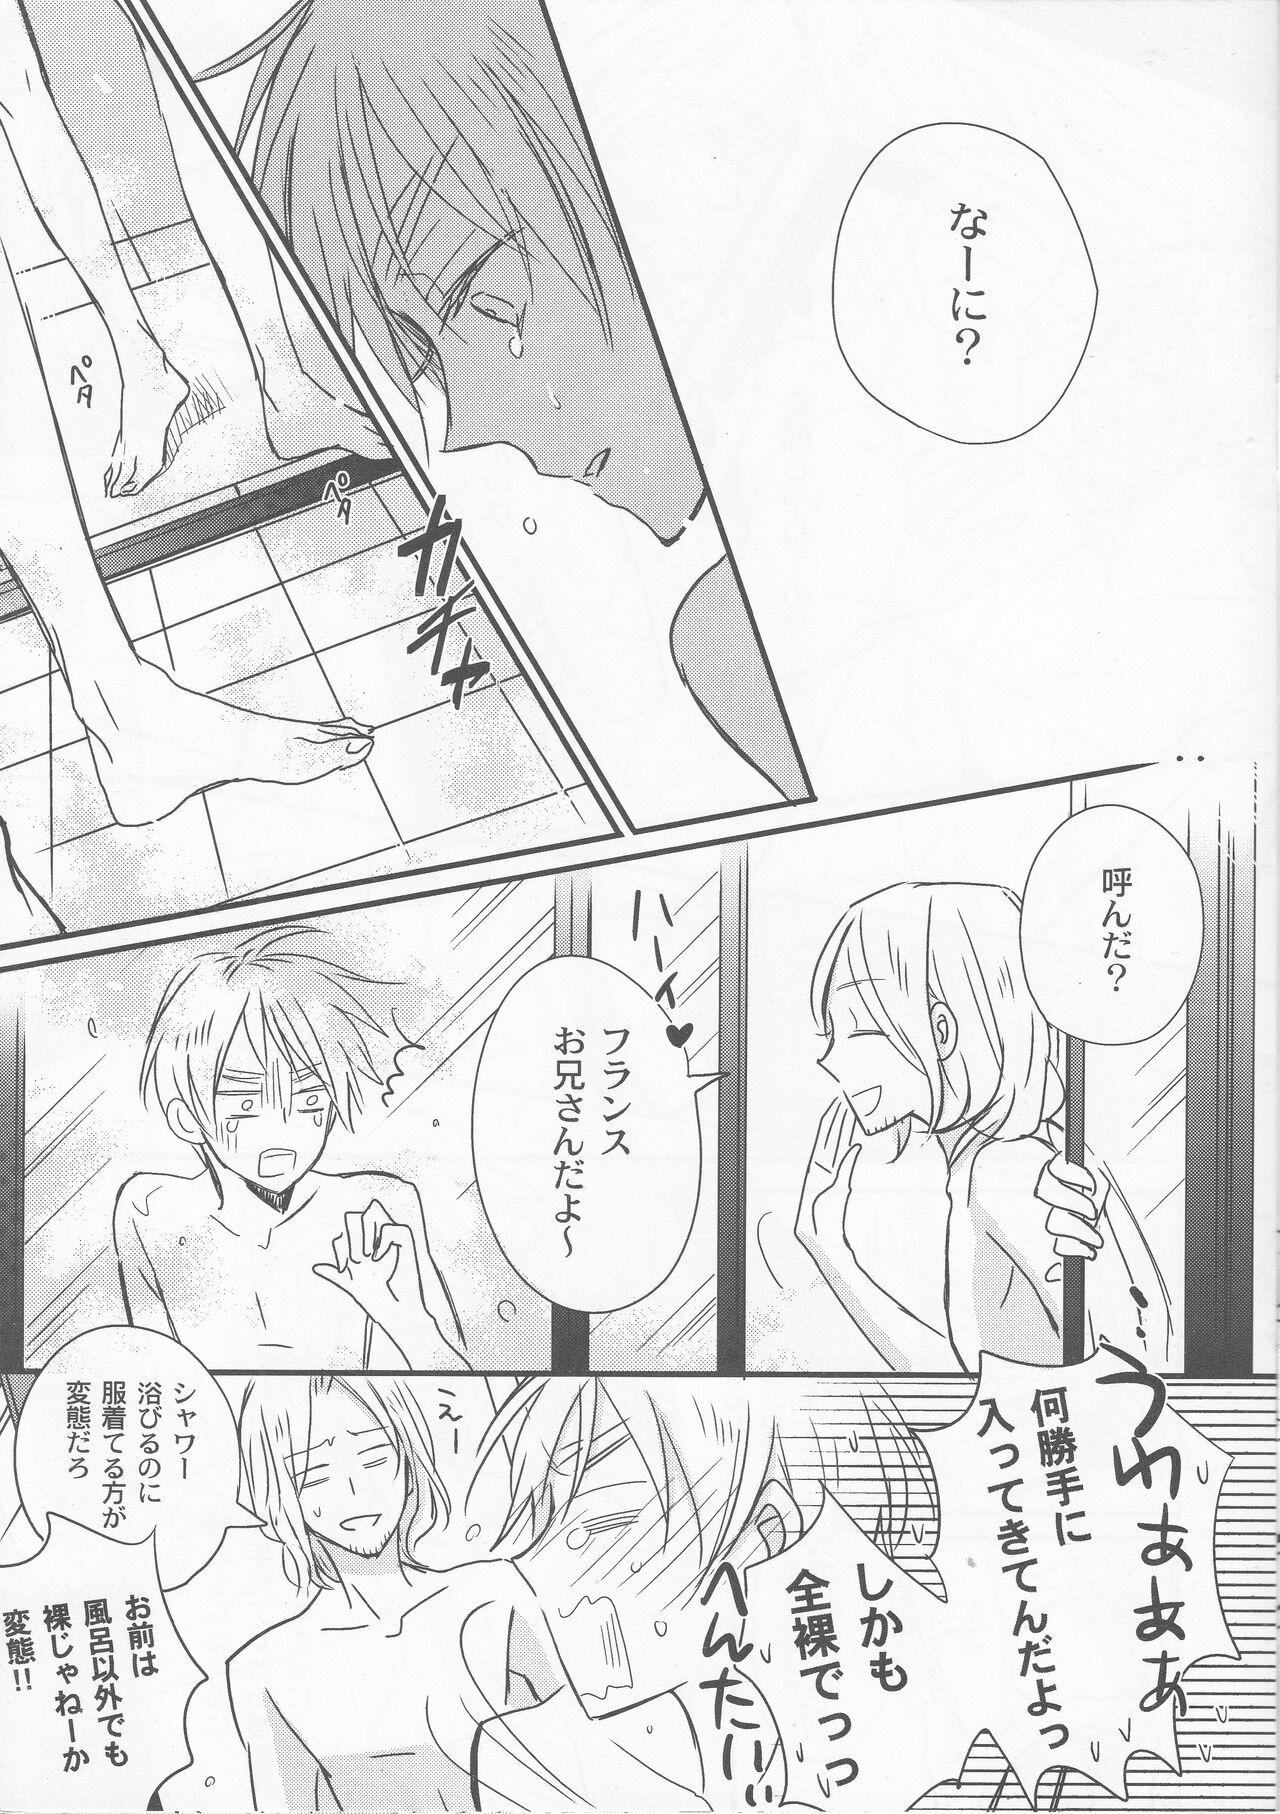 Guys unknown title - Axis powers hetalia Mamada - Page 8